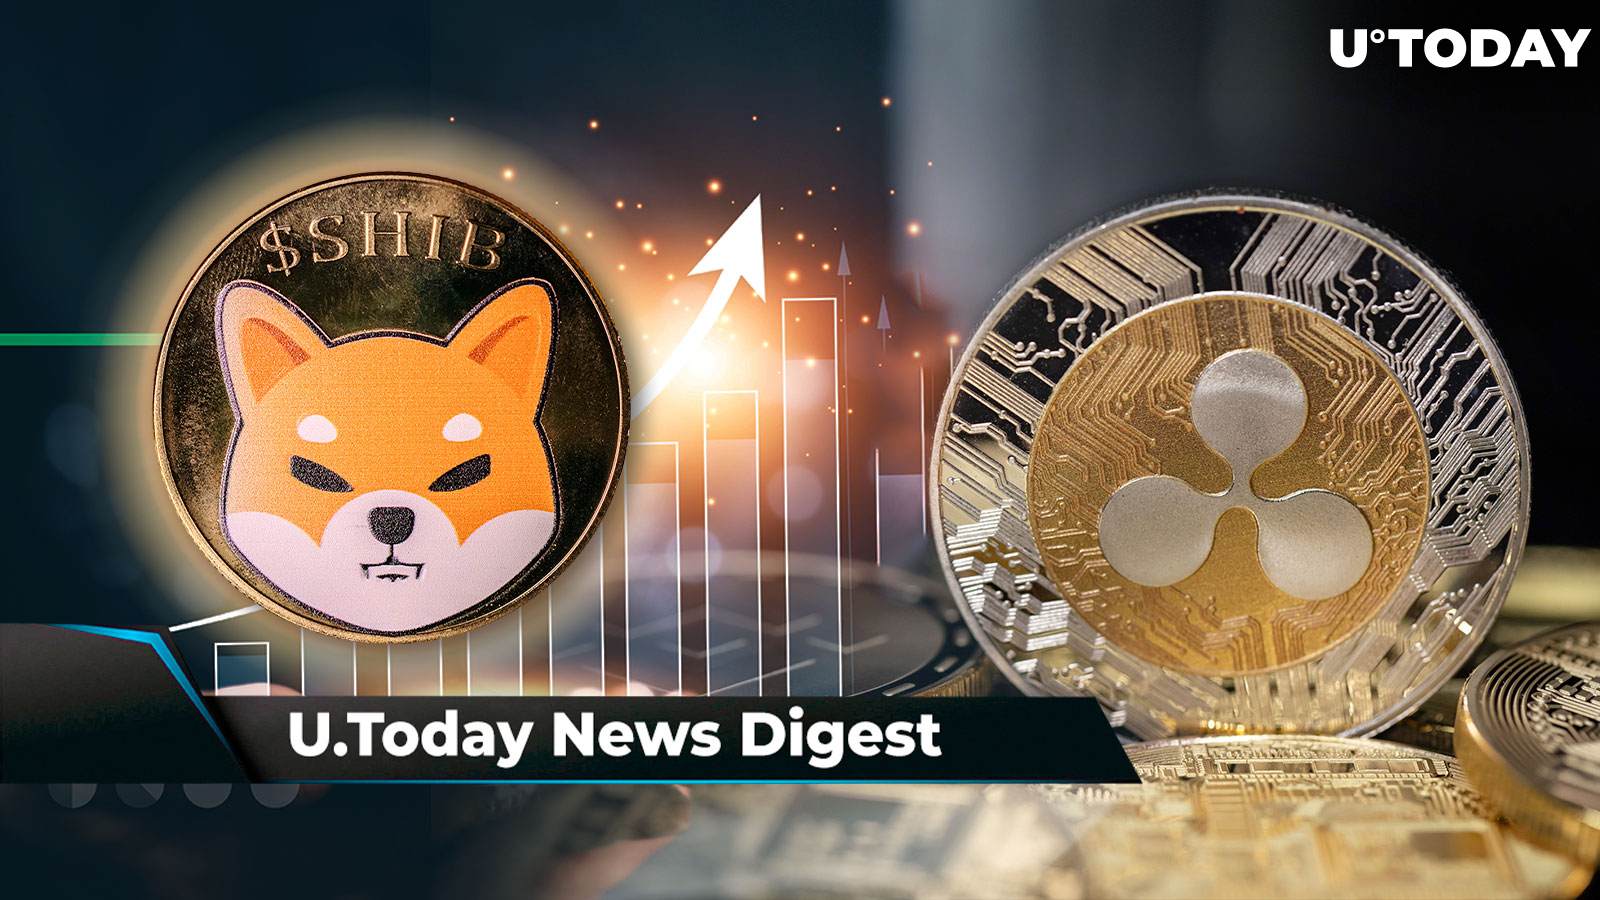 Ripple's New Partnership to Help Enhance Payments Globally, XRP Price to Target New ATH, SHIB Surpasses 4,490 Other Coins: Crypto News Digest by U.Today